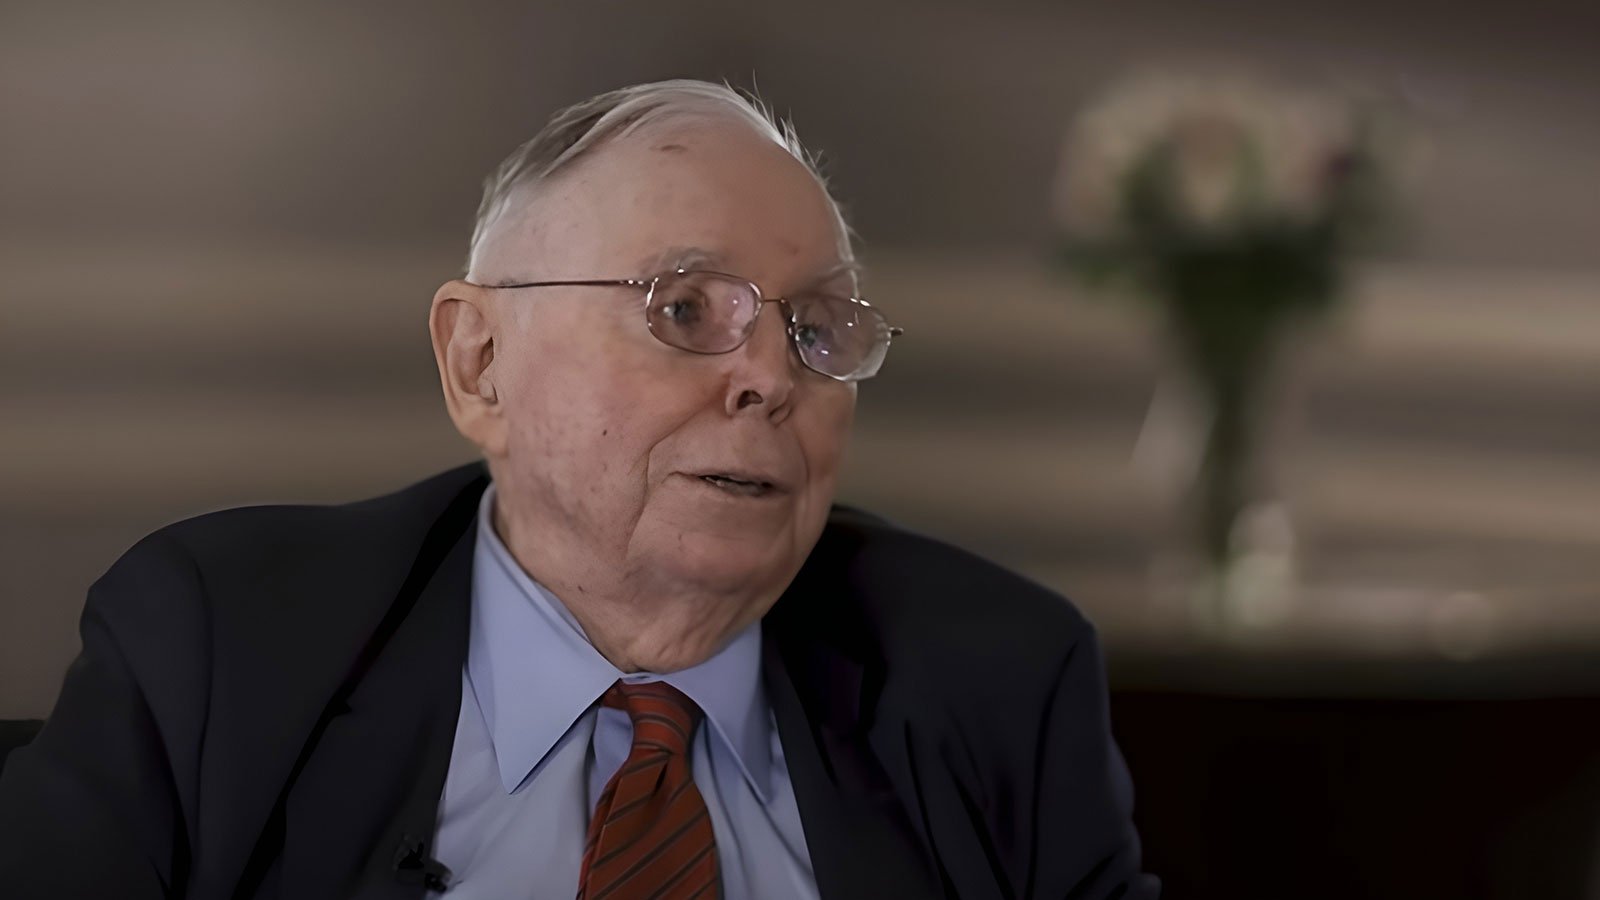 Warren Buffett’s Right-Hand Man Shreds Crypto: “Partly Fraud and Partly Delusion”